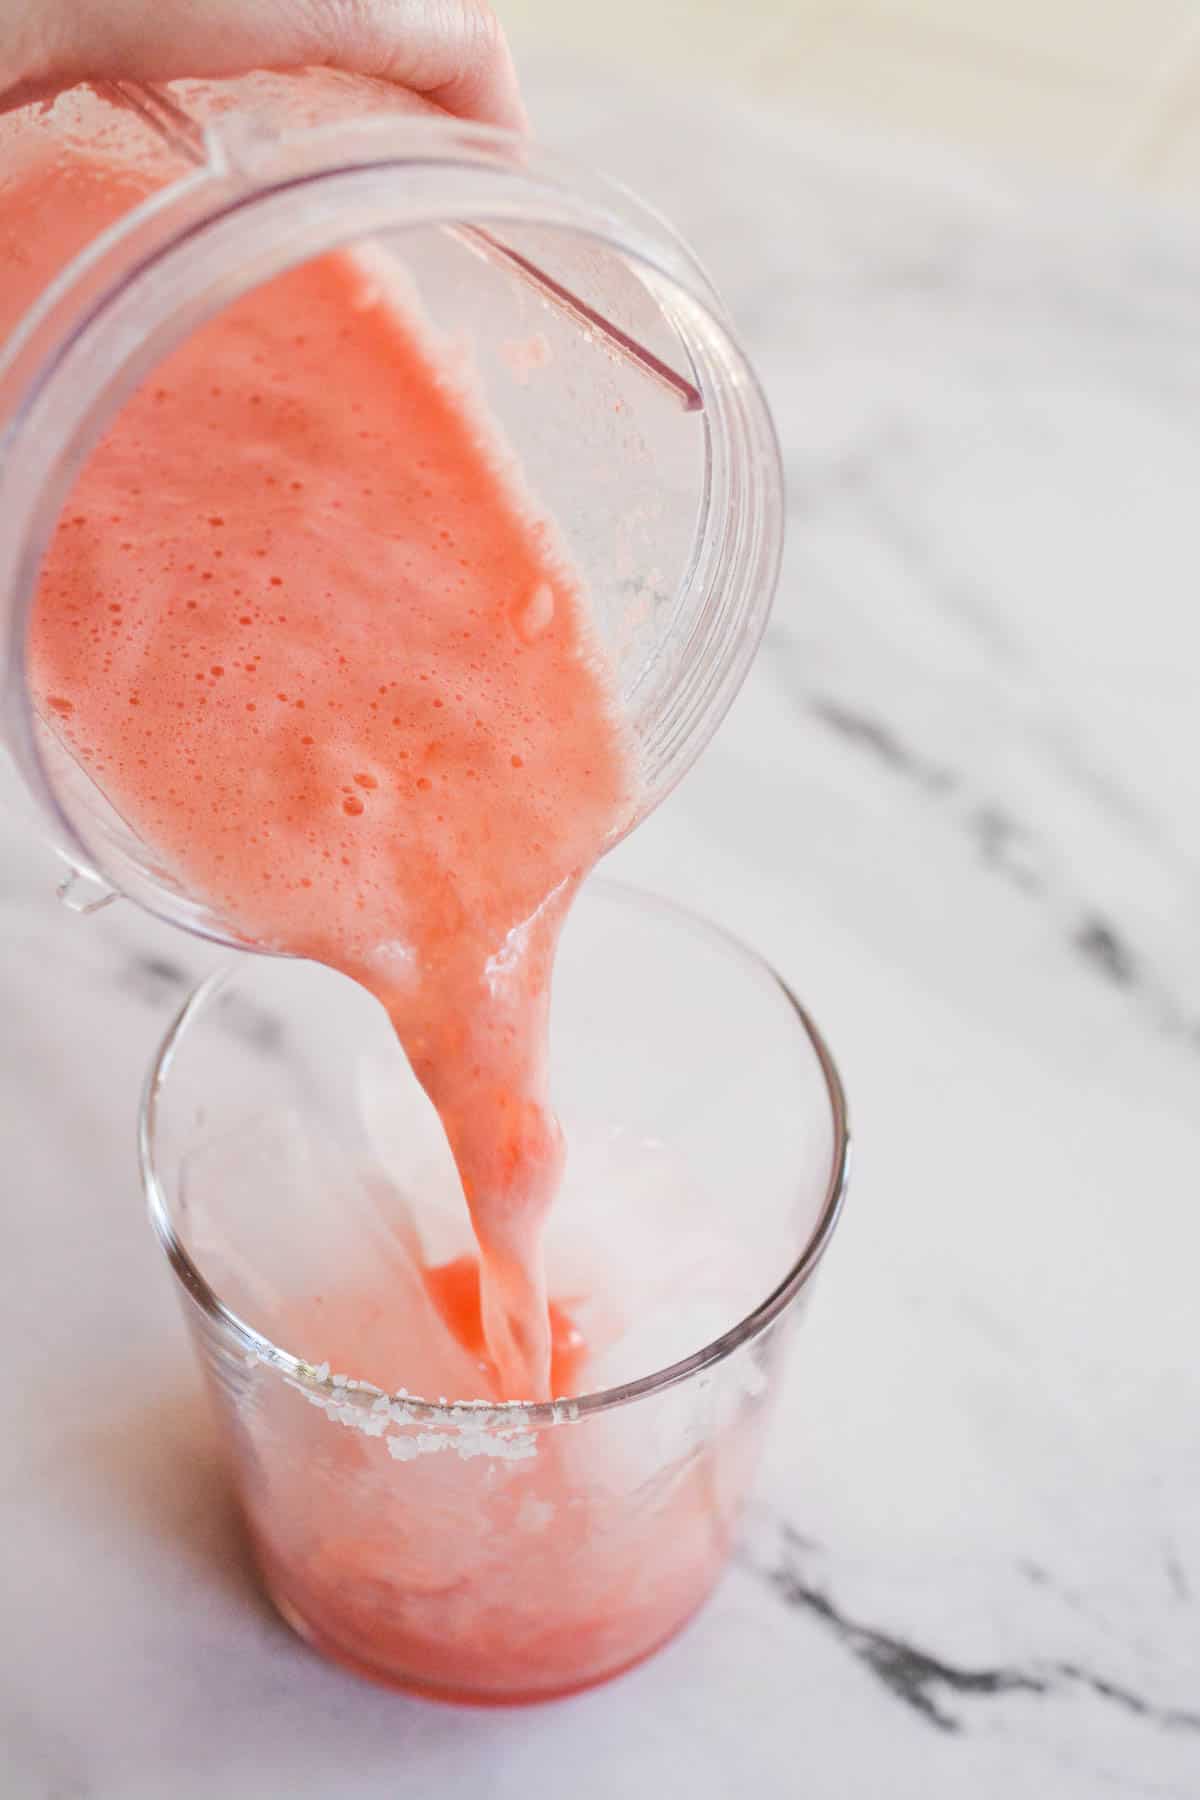 Pouring blended watermelon into a cocktail glass.